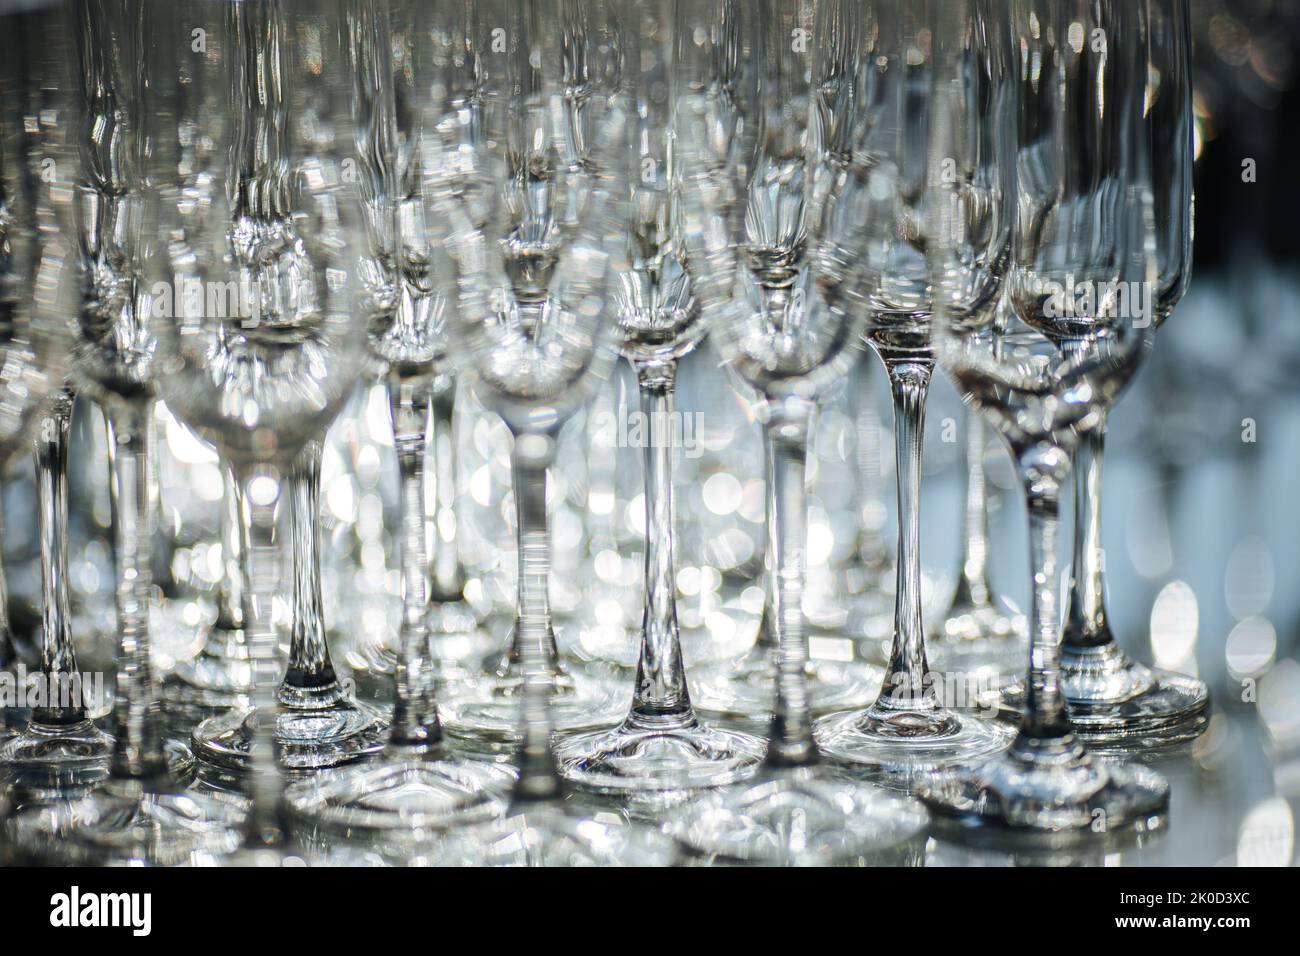 Group of empty and transparent champagne glasses in a restaurant. Clean glasses on a table prepared by the bartender for champagne. Catering for the event preparation, empty glasses for drink. Stock Photo